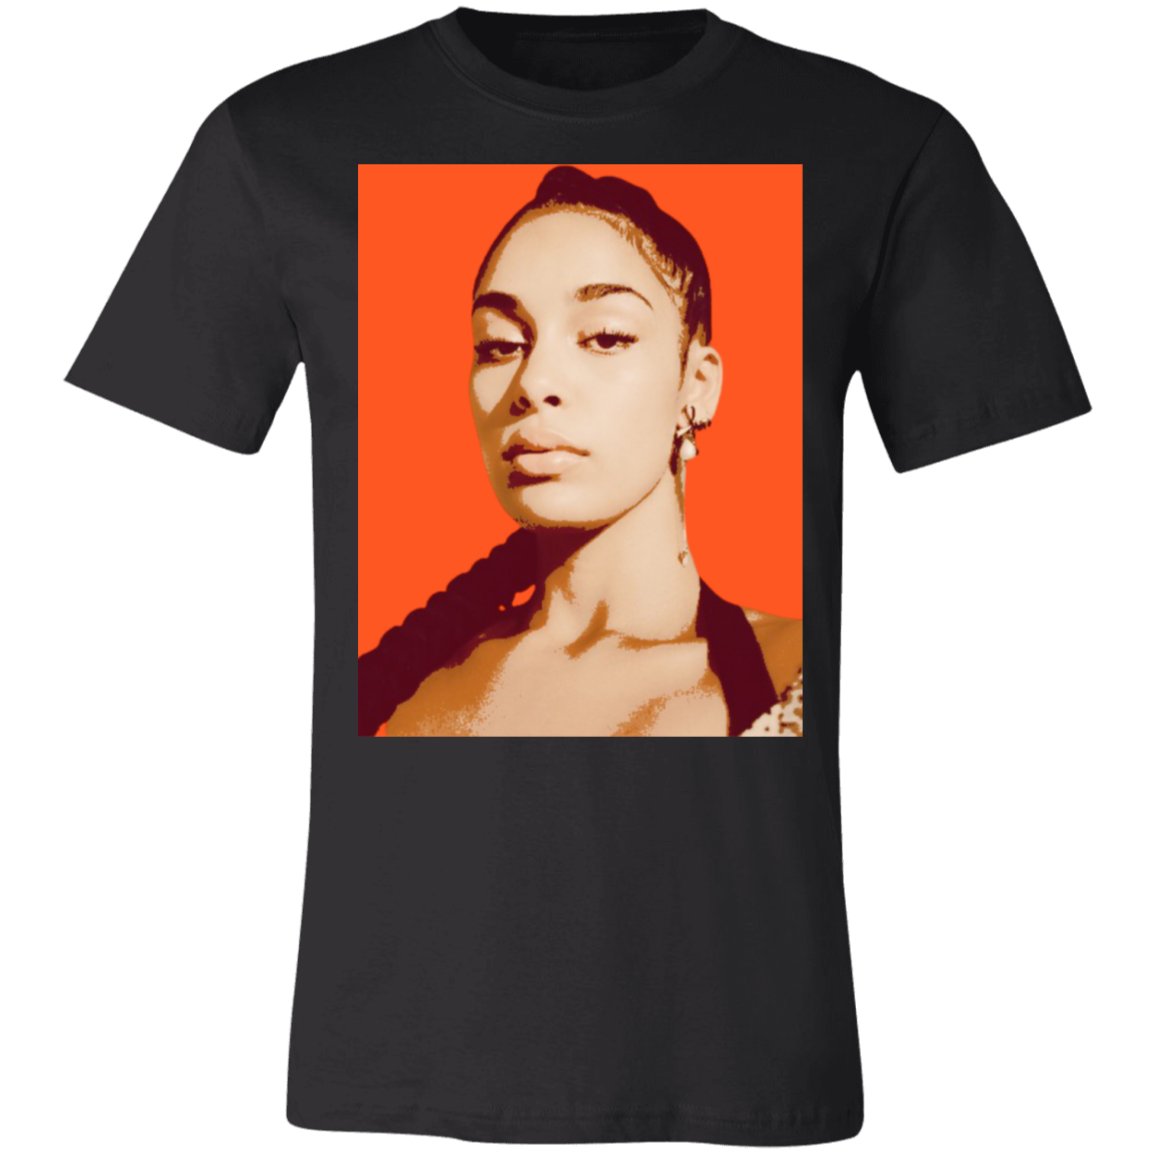 alicia key graphic tee in black, the design has an orange background